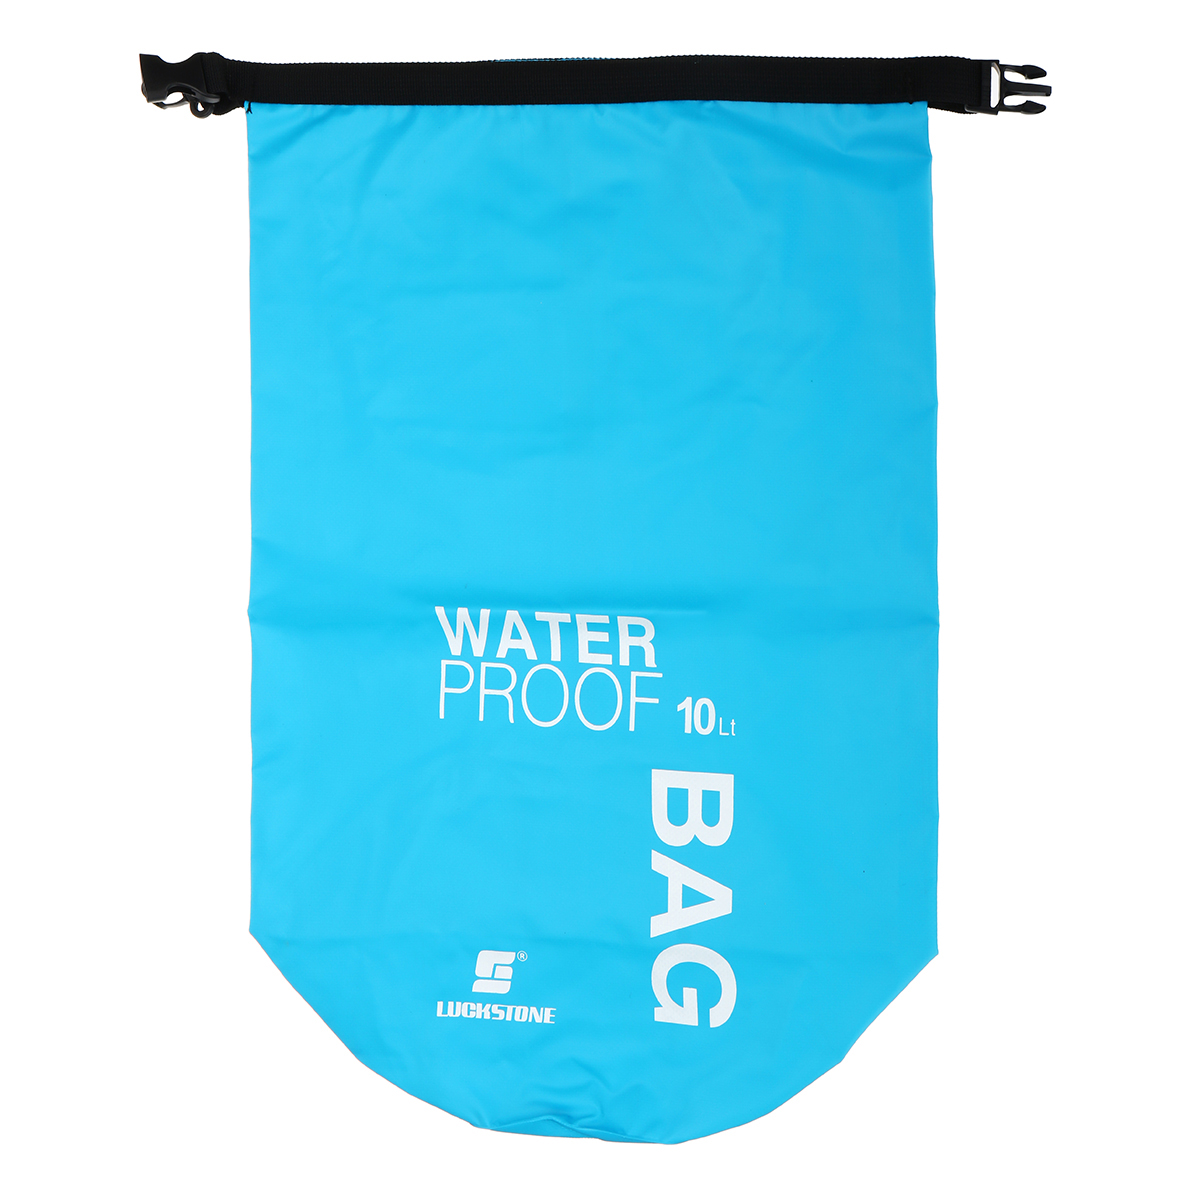 10L-Outdoor-Swimming-Air-Inflation-Floating-Mobile-Phone-Camera-Storage-PVC-Waterproof-Bag-1820807-12